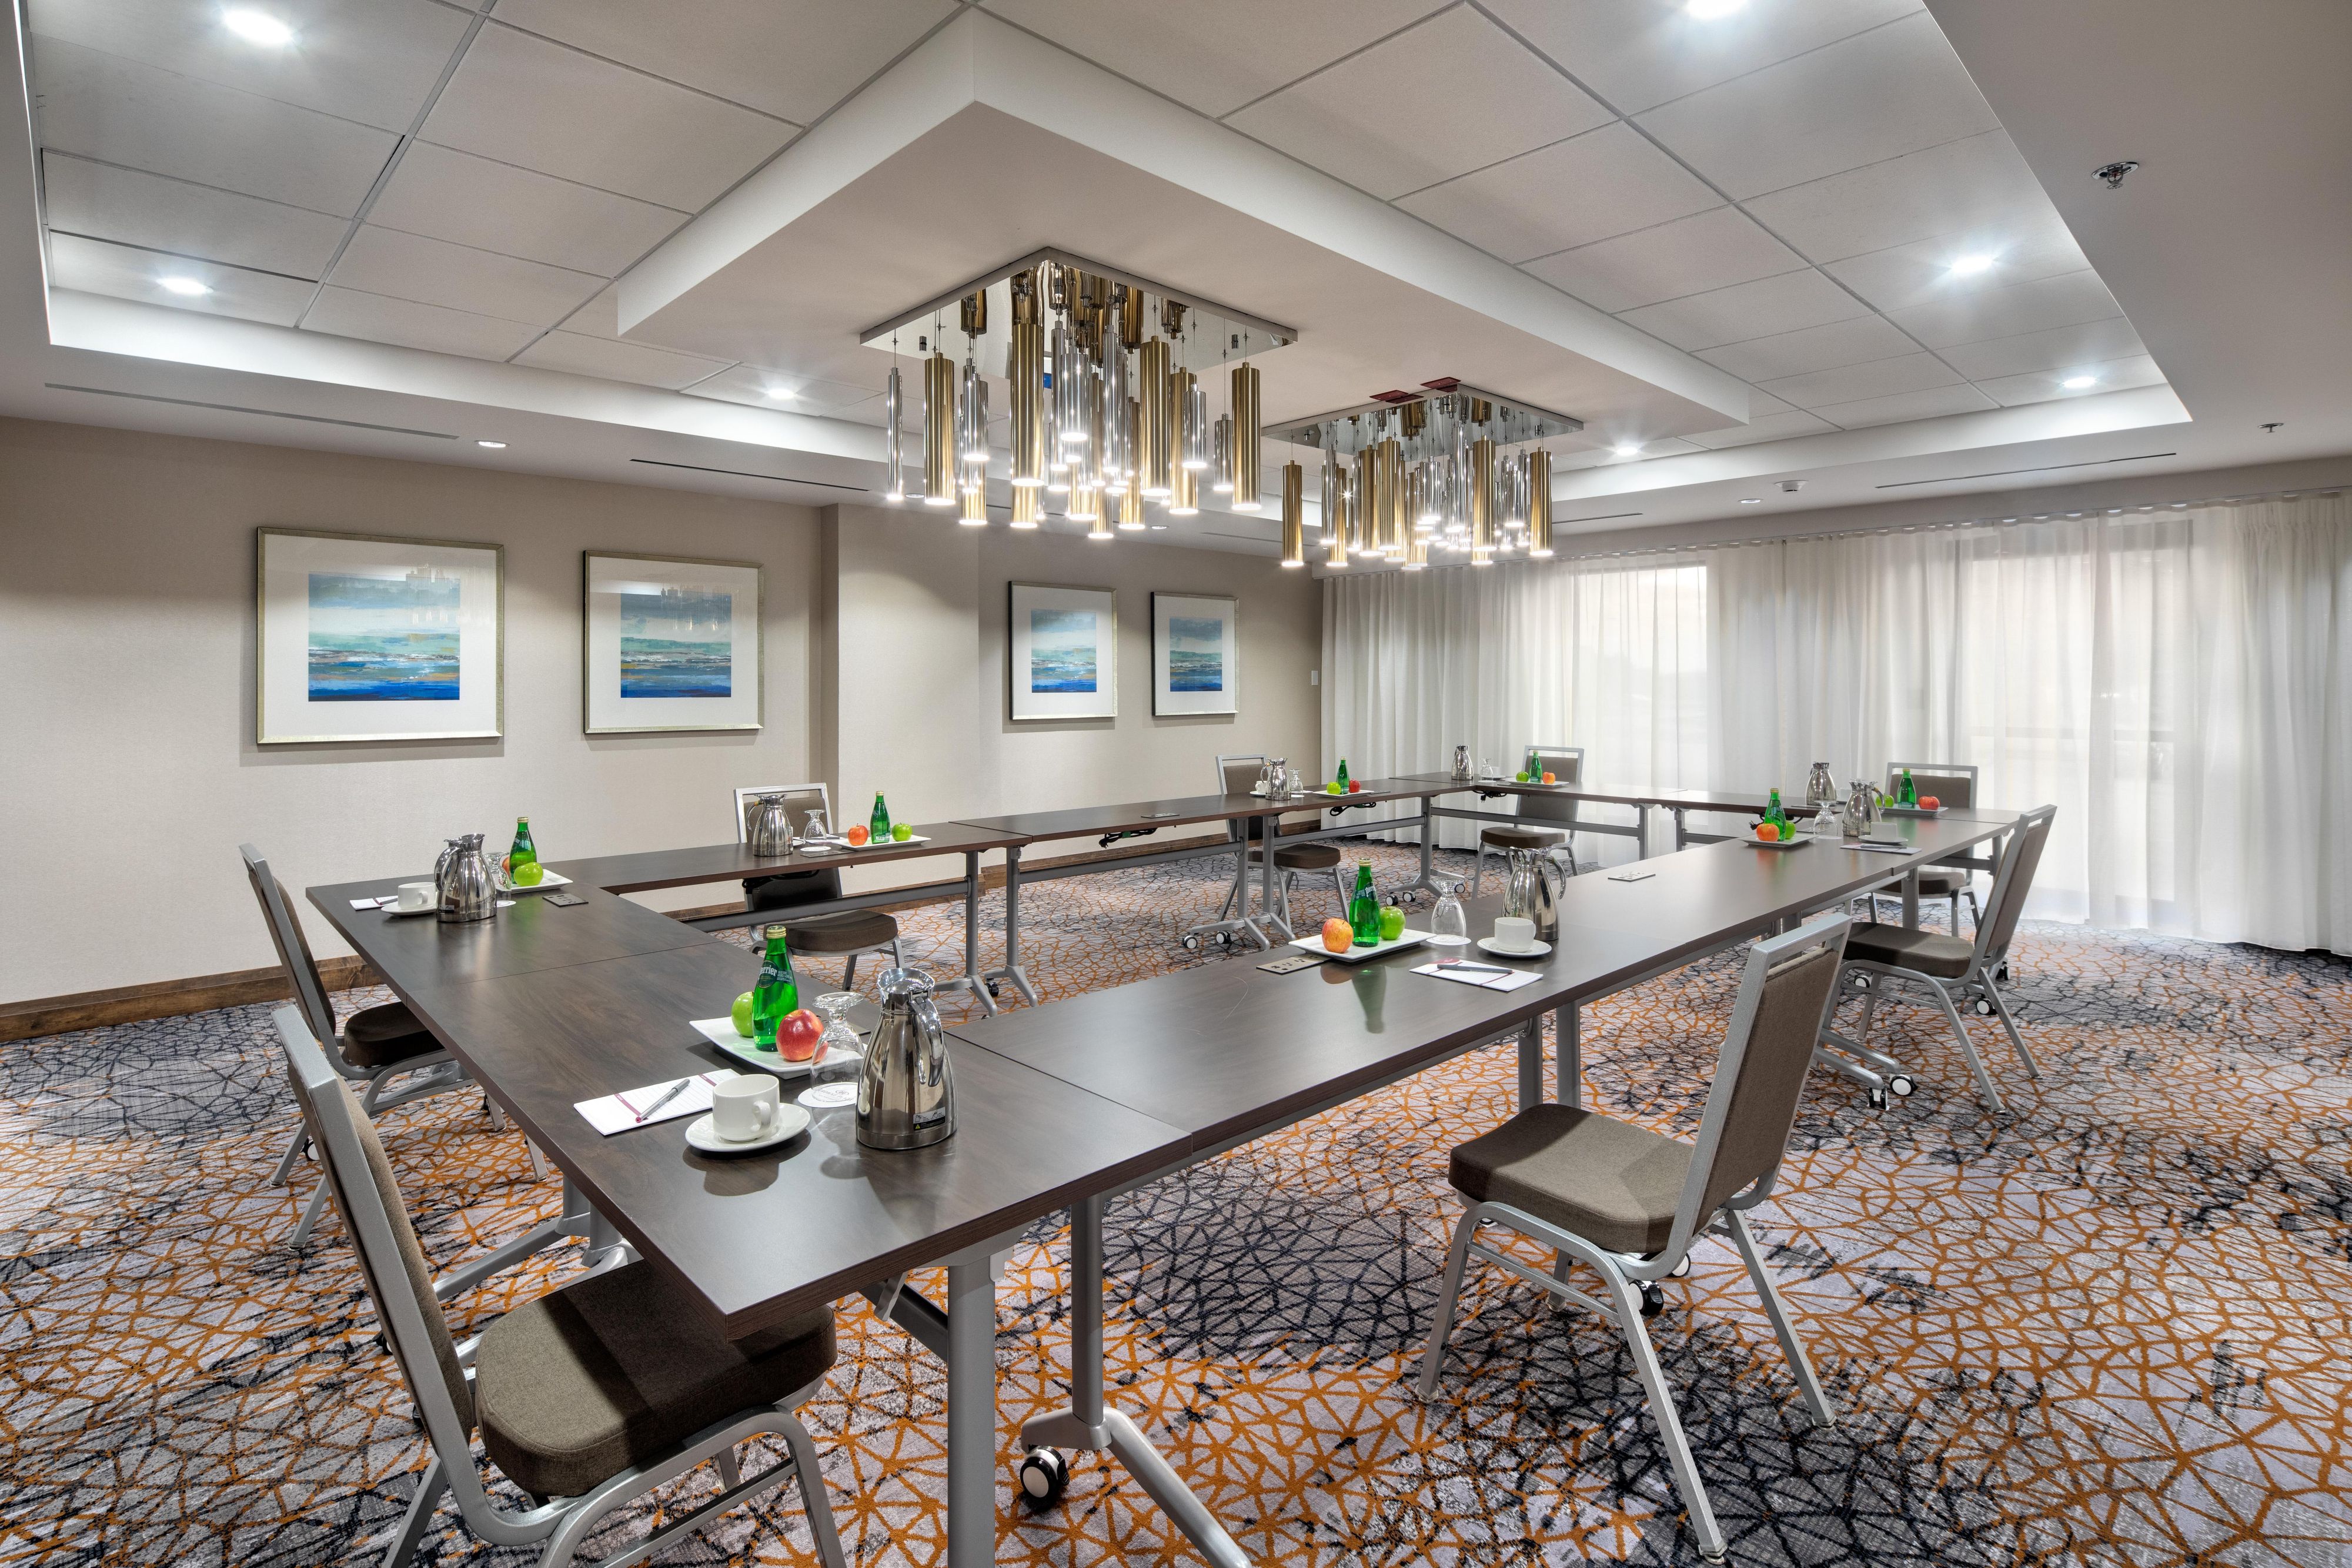 Trillium Meeting Room, a modern space perfect for your meetings.